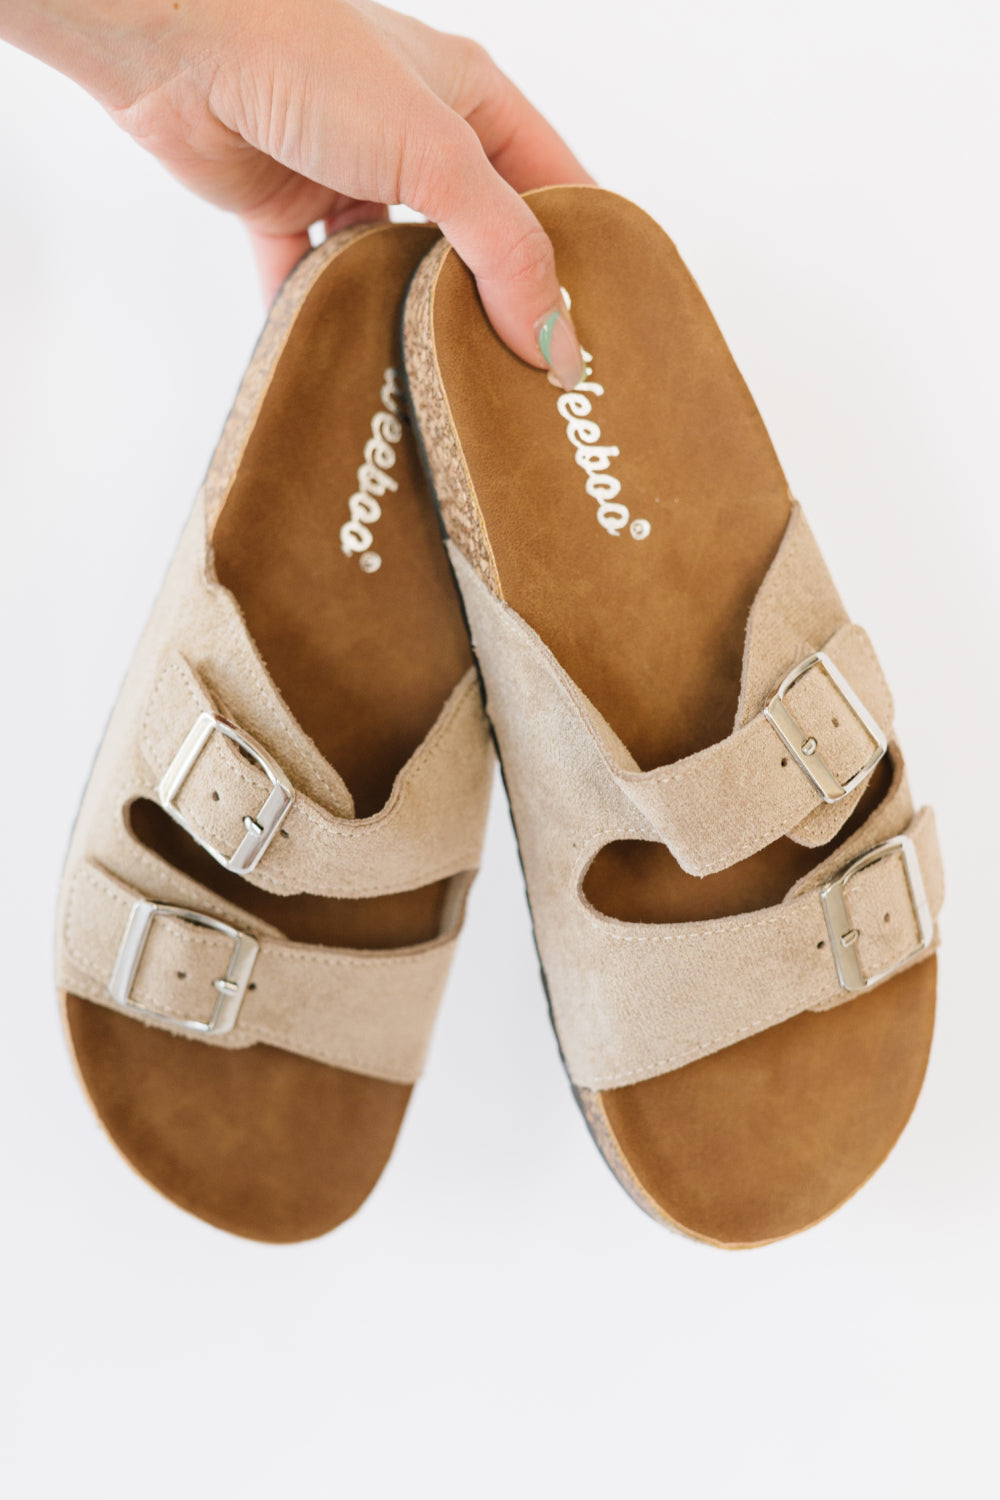 Kerrington Soft Footbed Sandals in Taupe   